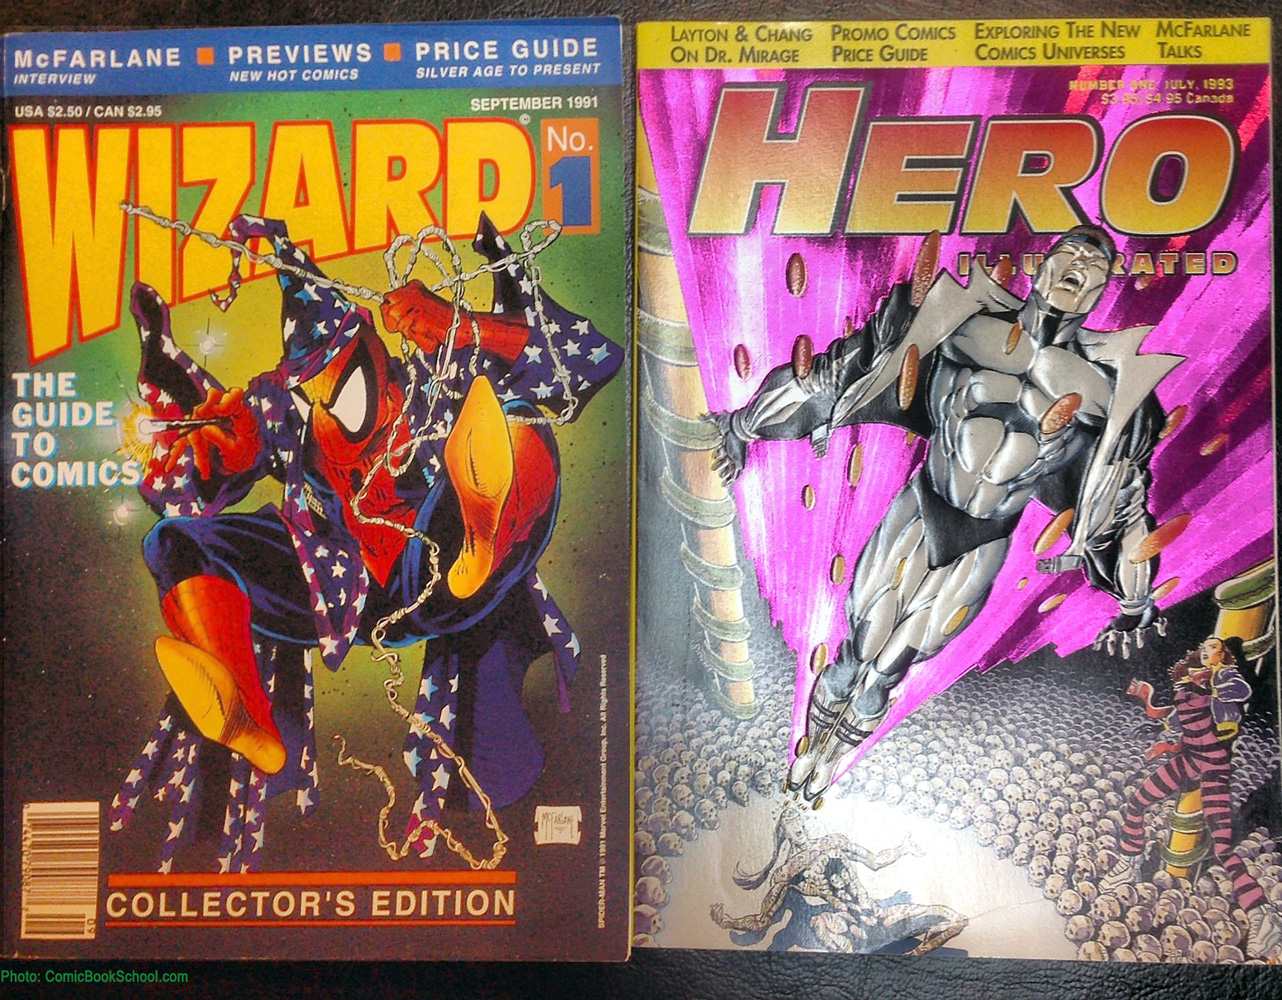 Wizard cover and Hero Illustrated cover